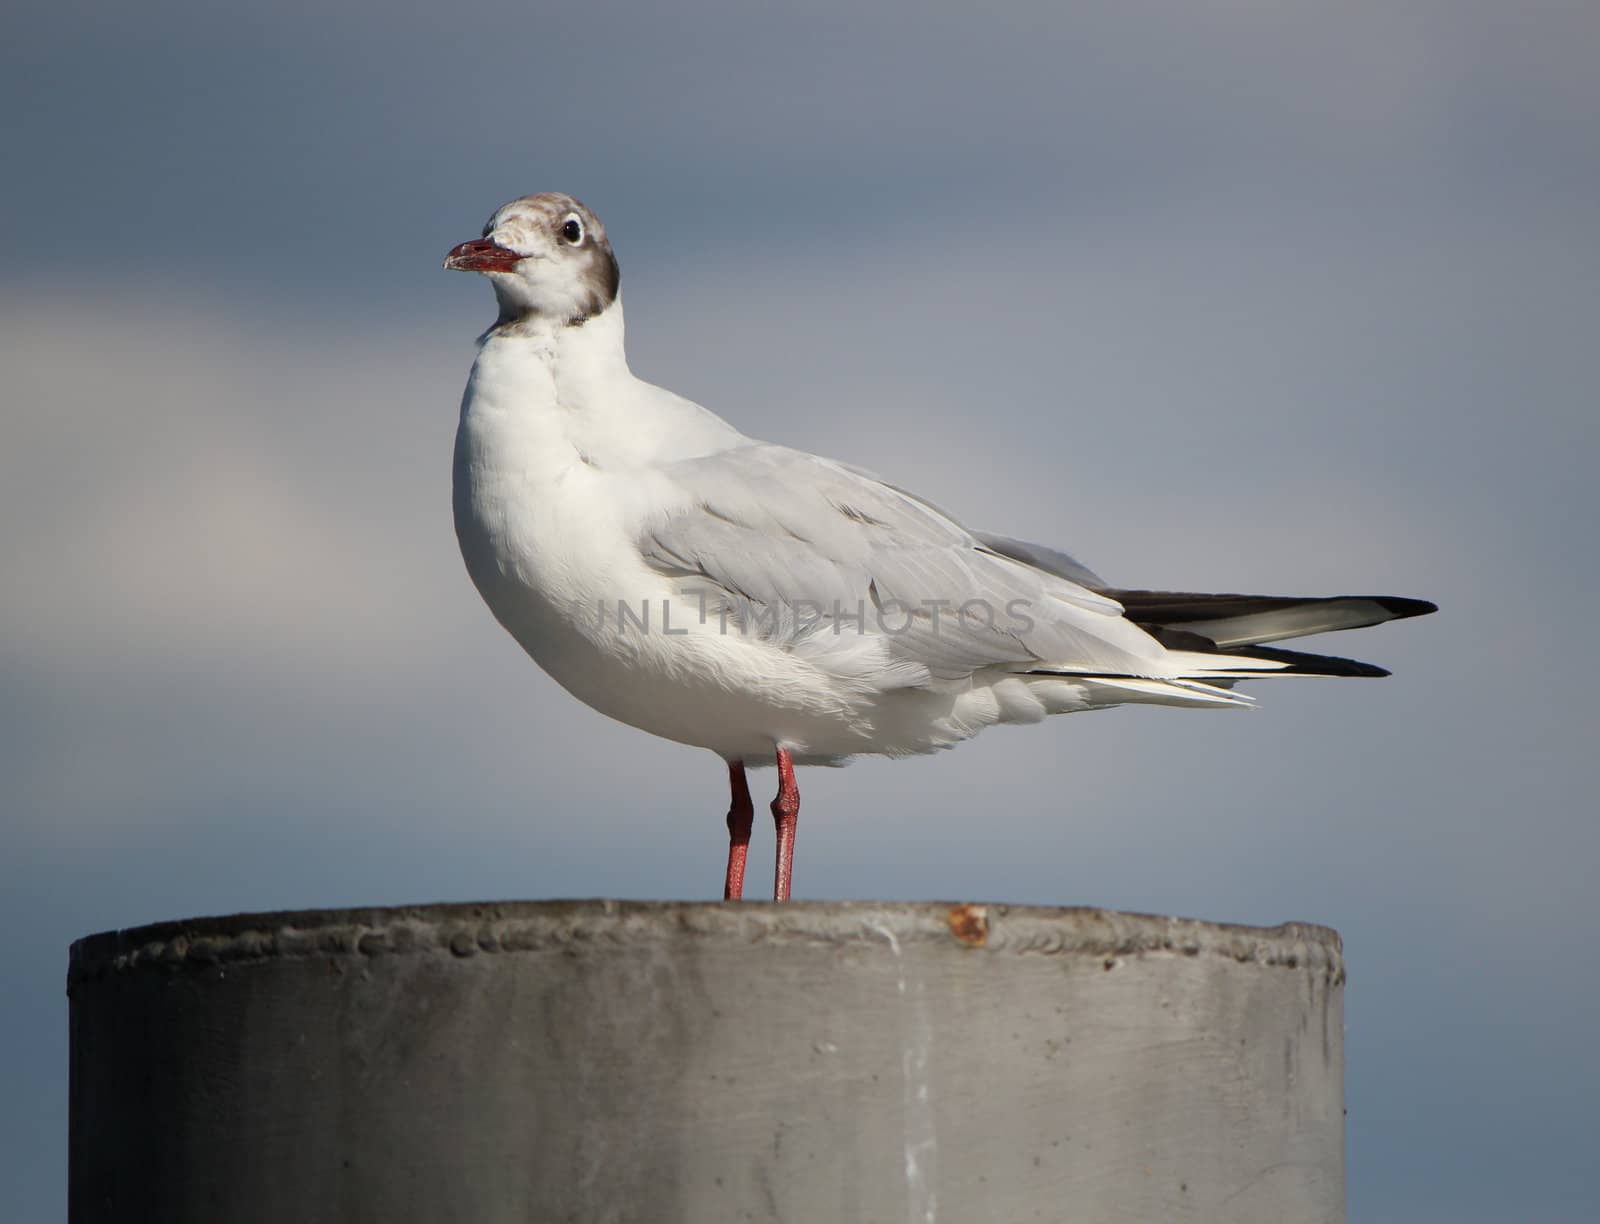 White and grey seagull standing on a post and looking far away